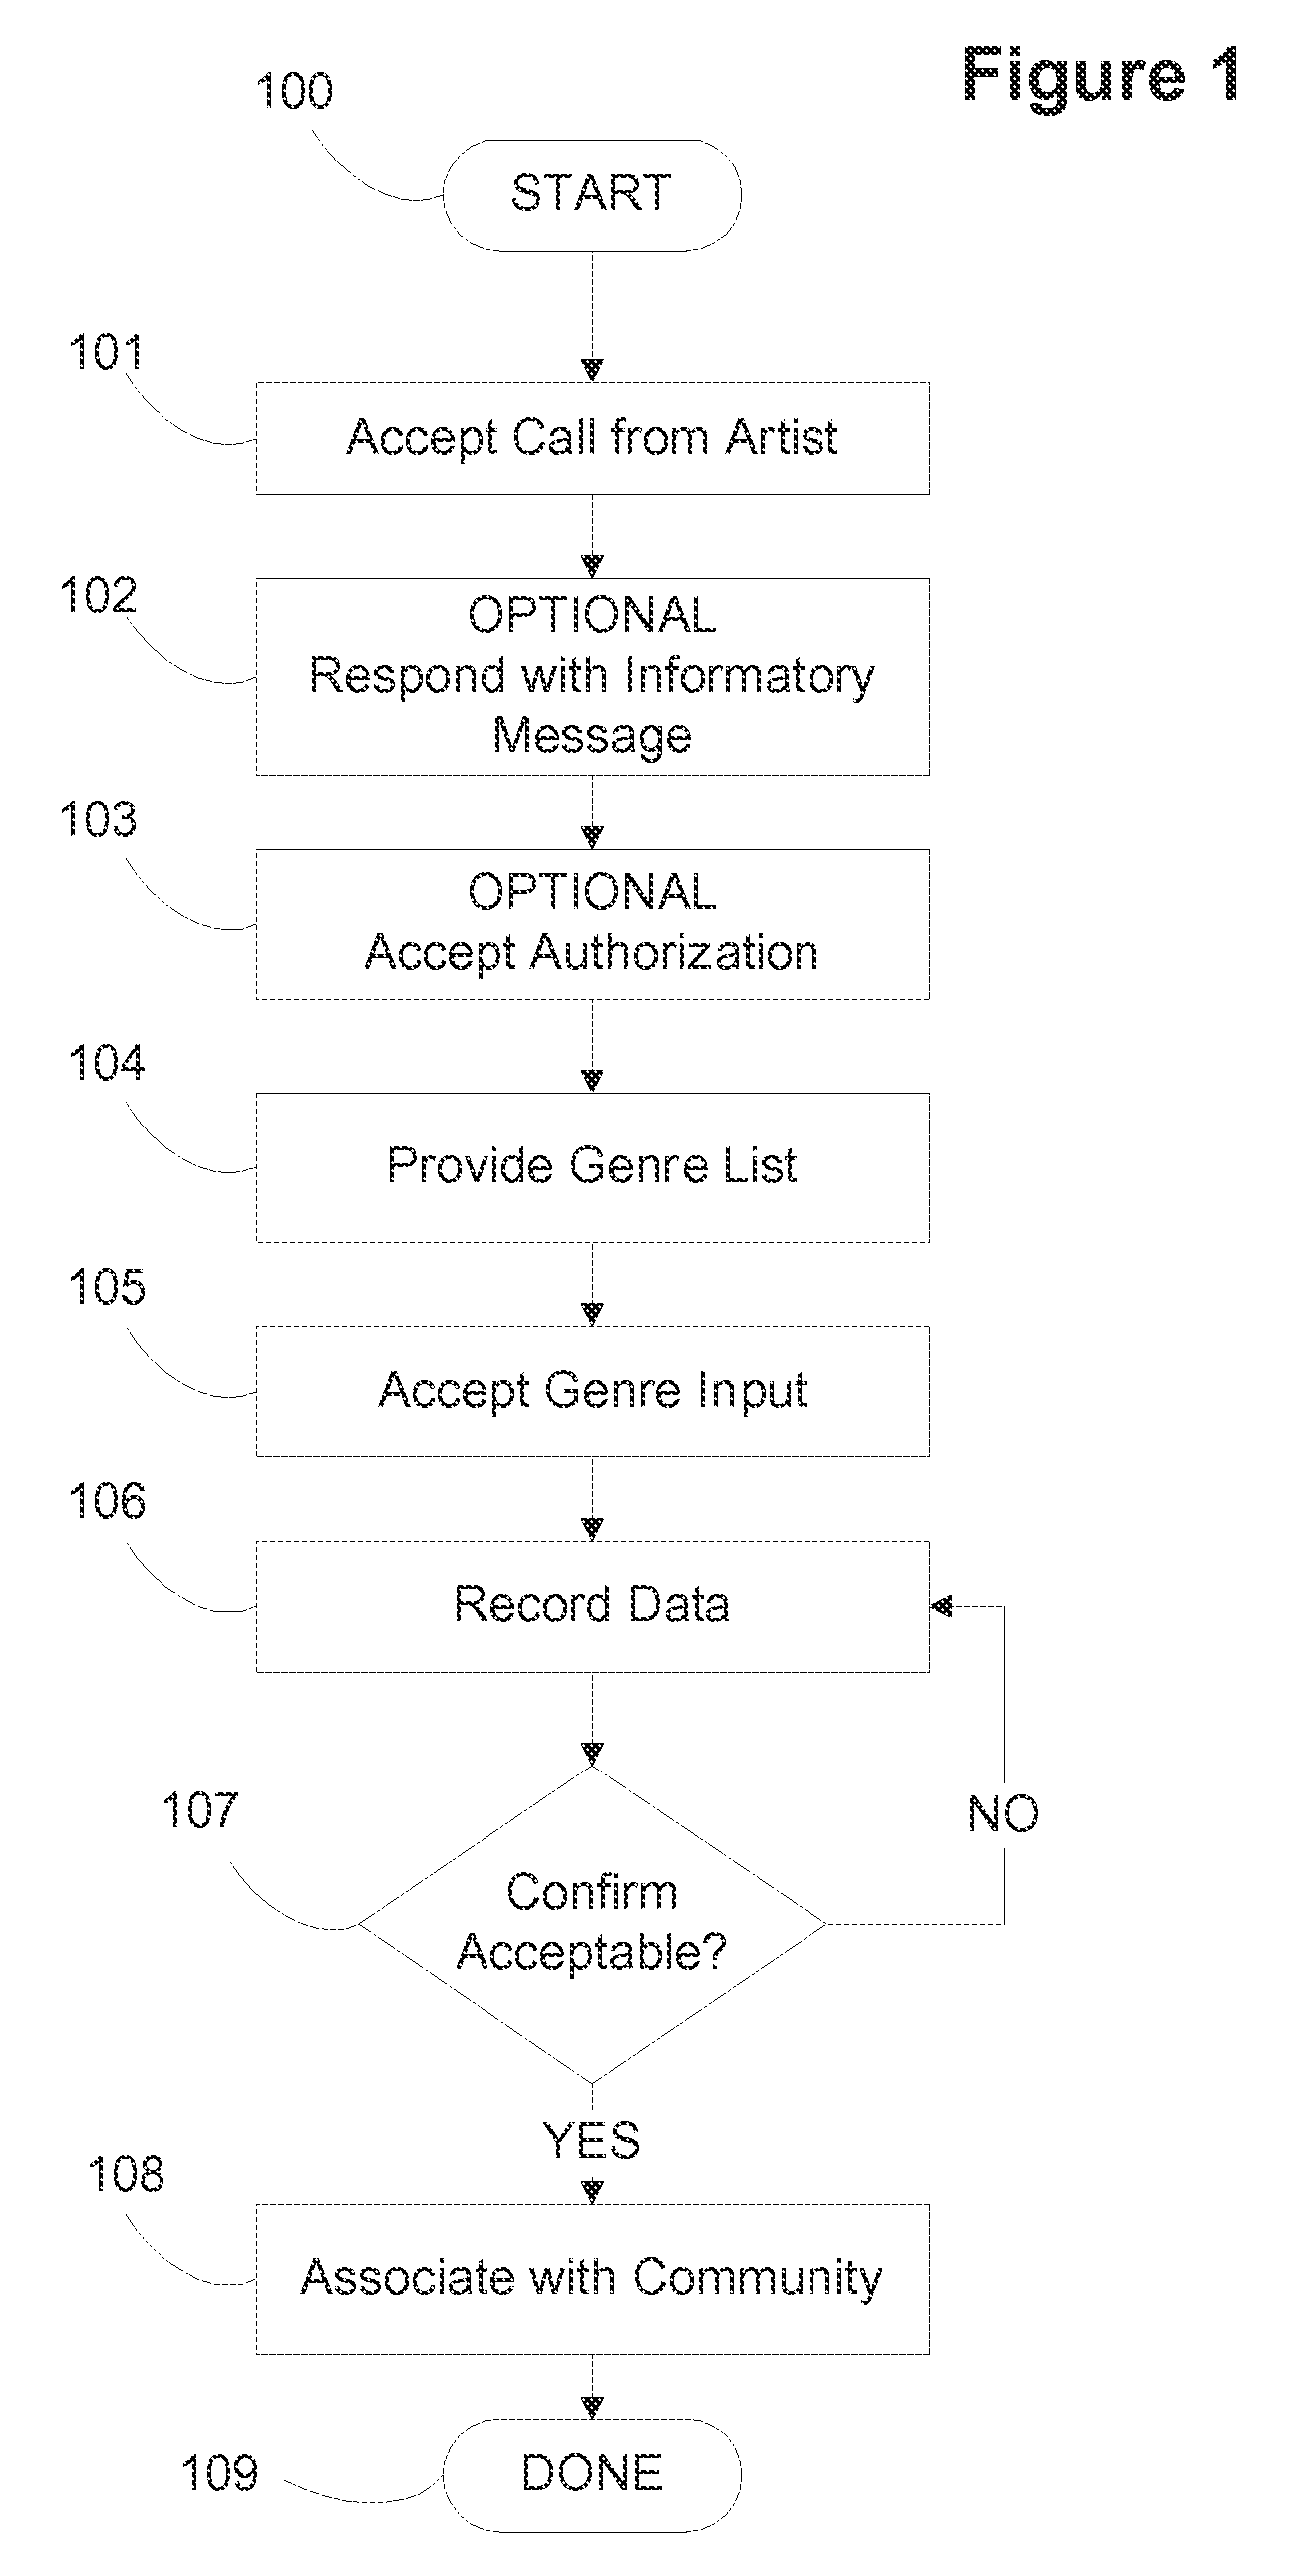 System for submitting performance data to a feedback community determinative of an outcome